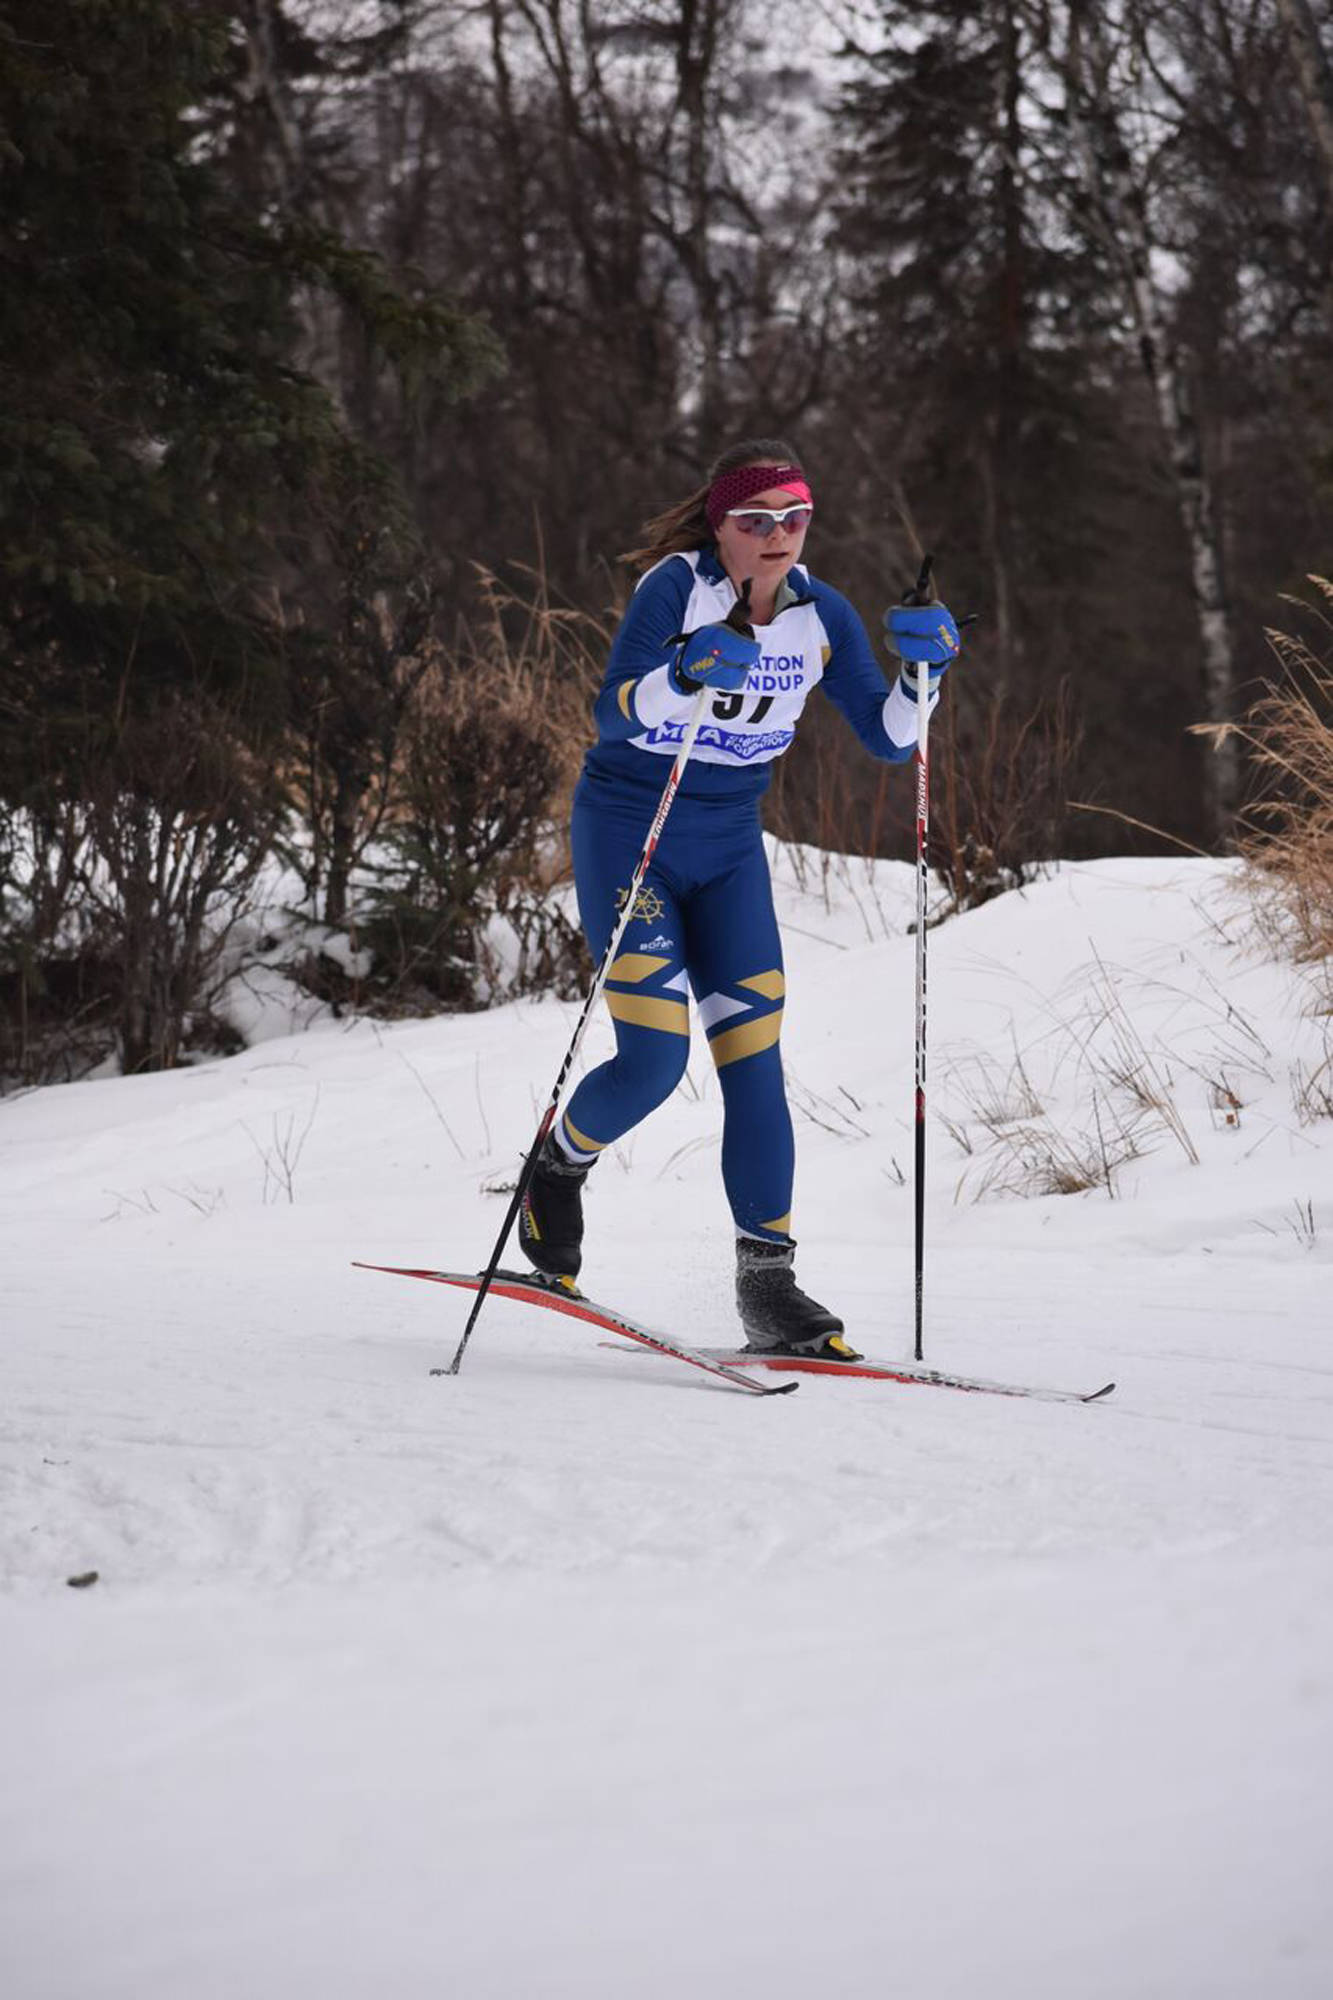 Katia Holmes skis during a two-day race from Jan. 12-13, 2018 at Government Peak in Hatcher Pass, Alaska. (Photo by Kate Baring)